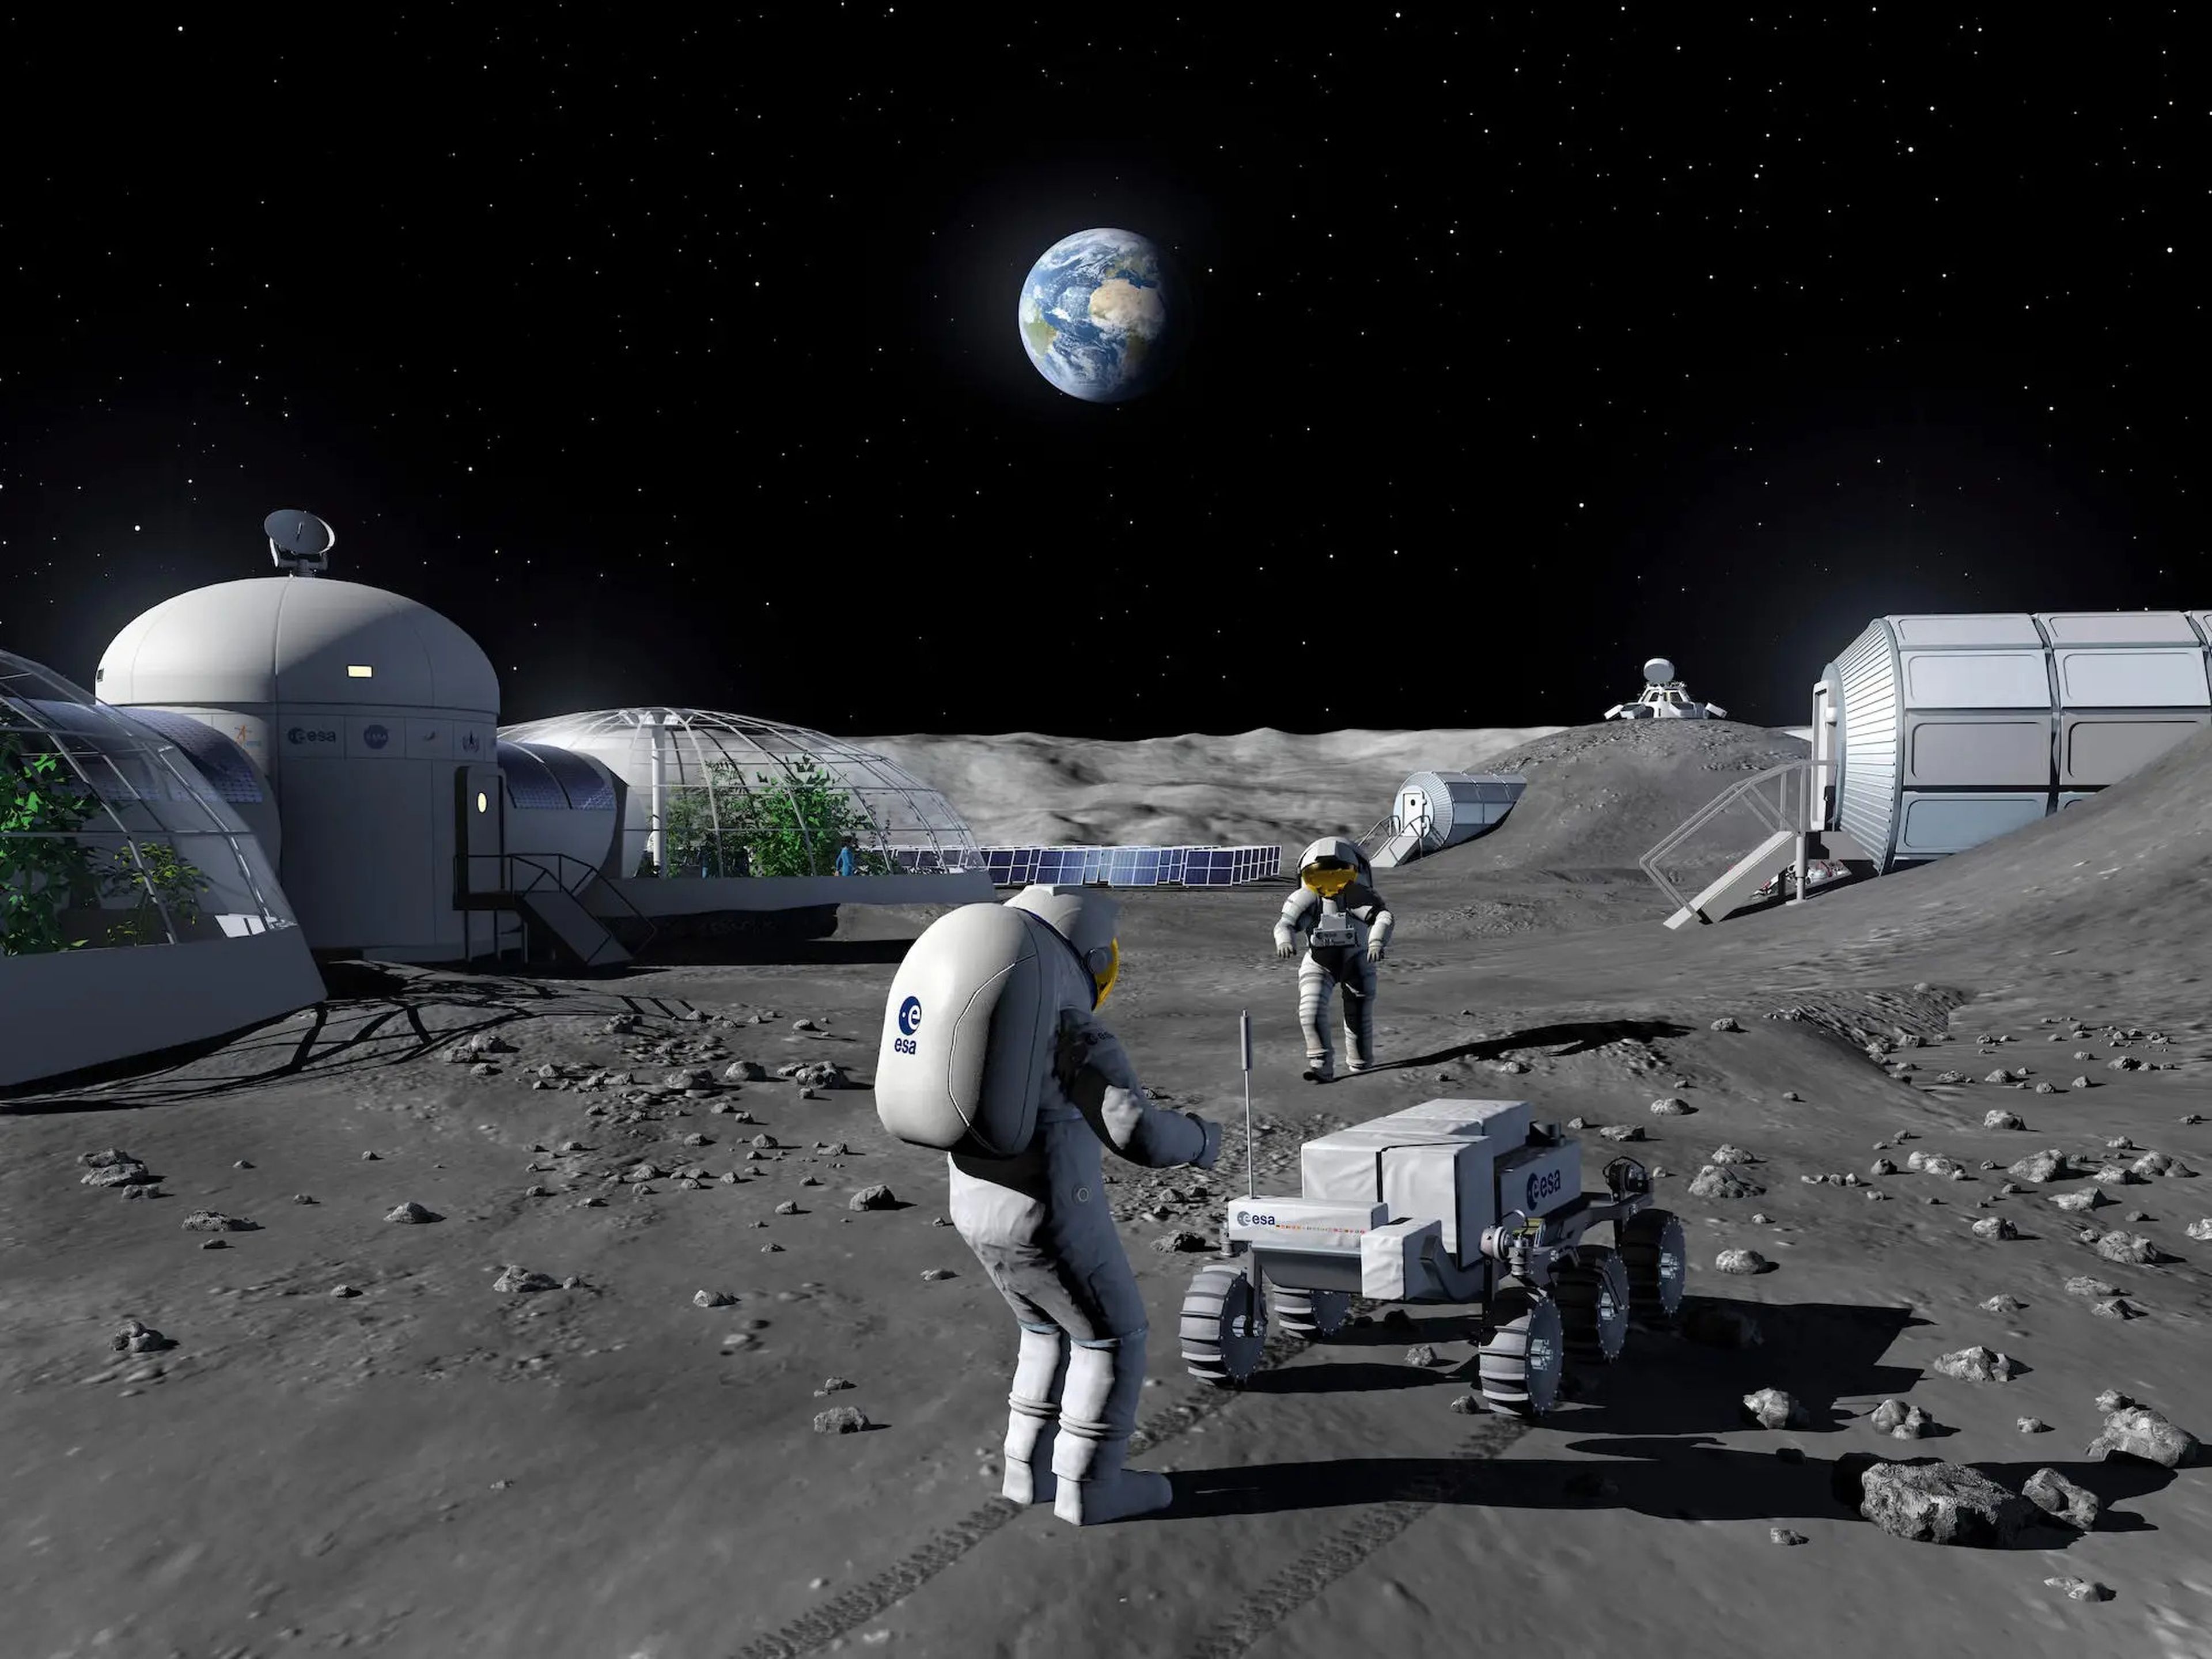 An illustration shows what a lunar base could look like, with astronauts walking around in suits doing tasks and the earth on the horizon.